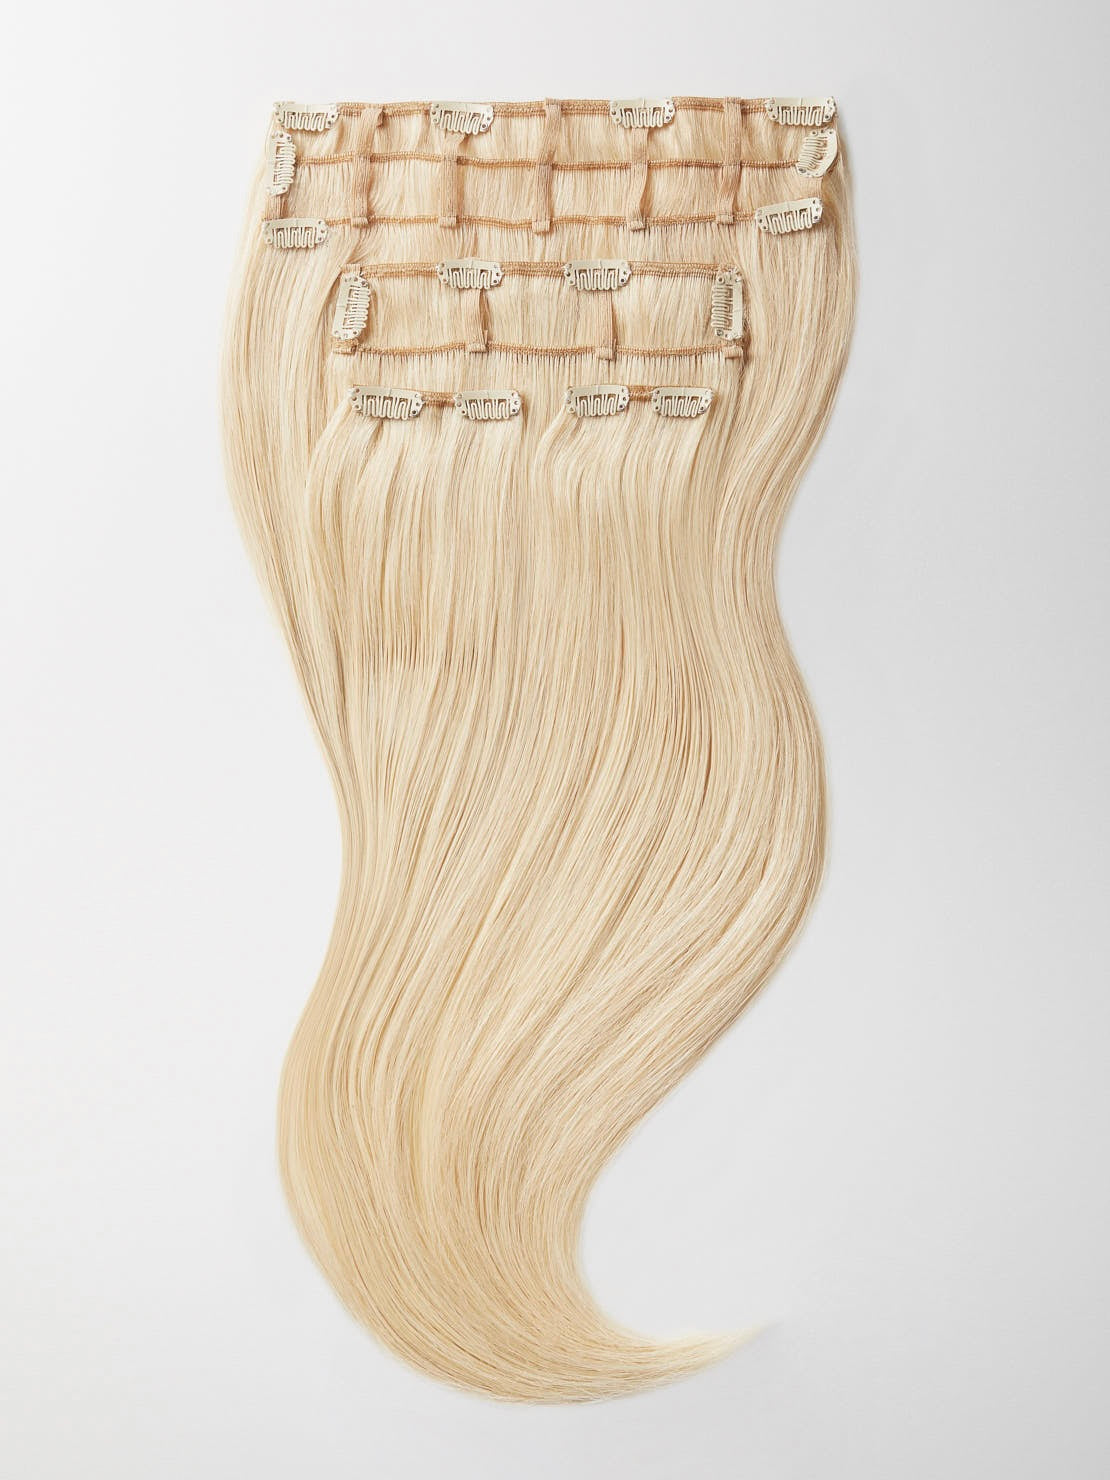 Clip in Extensions - luxury Qualität - easy volume 7-teilig - 125g product image - 9a4a8003e42451e3f2b740b724ffb34092fc692cf2dfeee49bee199fb88486b7